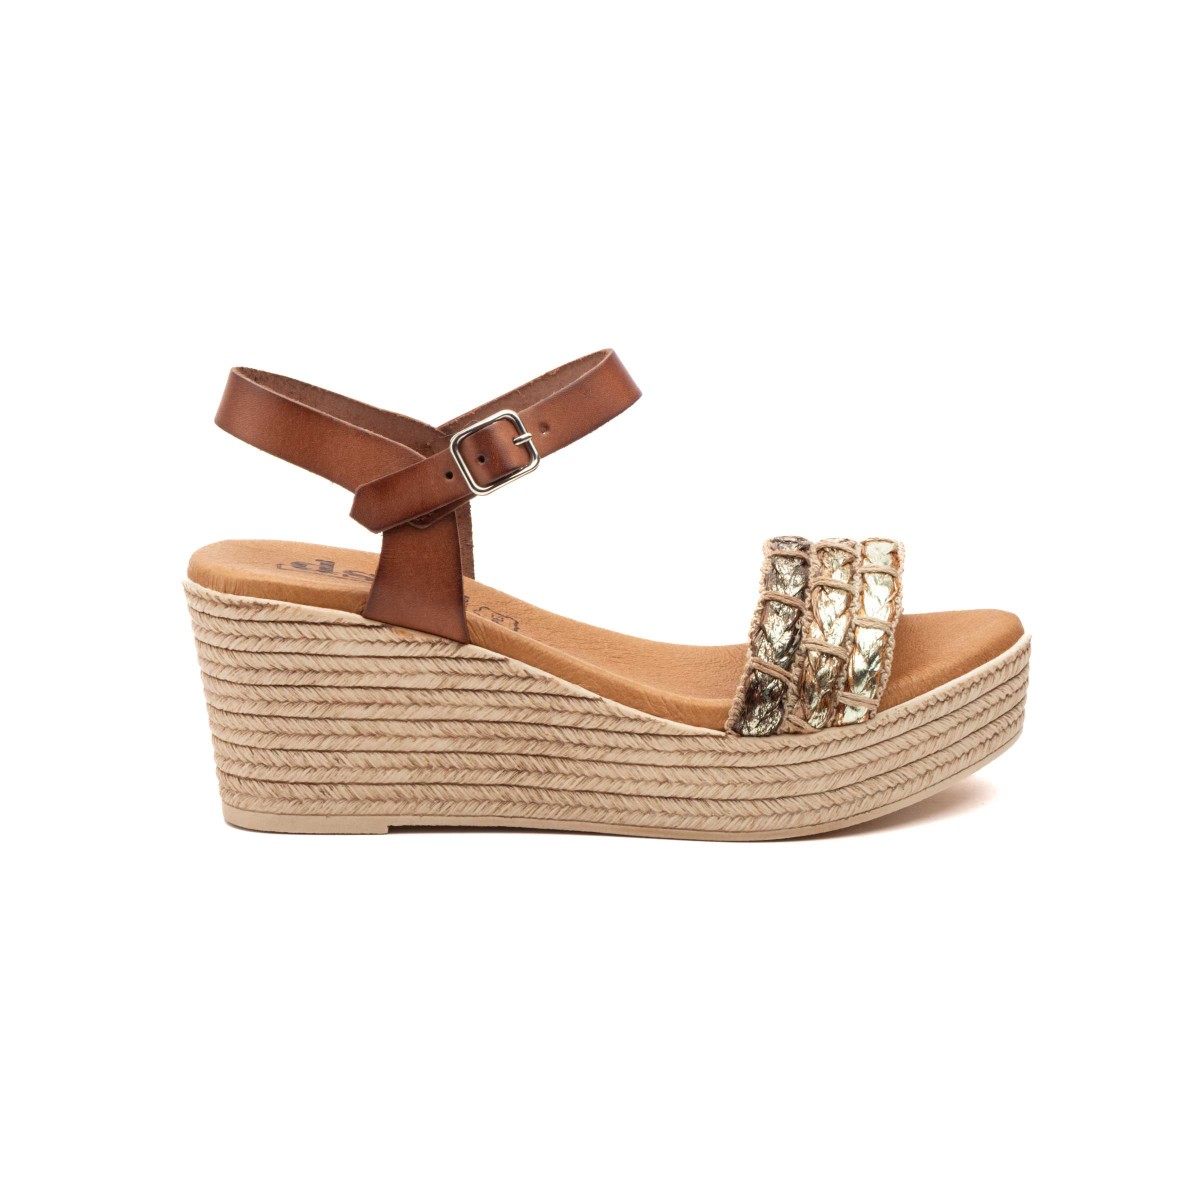 Brown leather and jute sandals with wedge by DSD